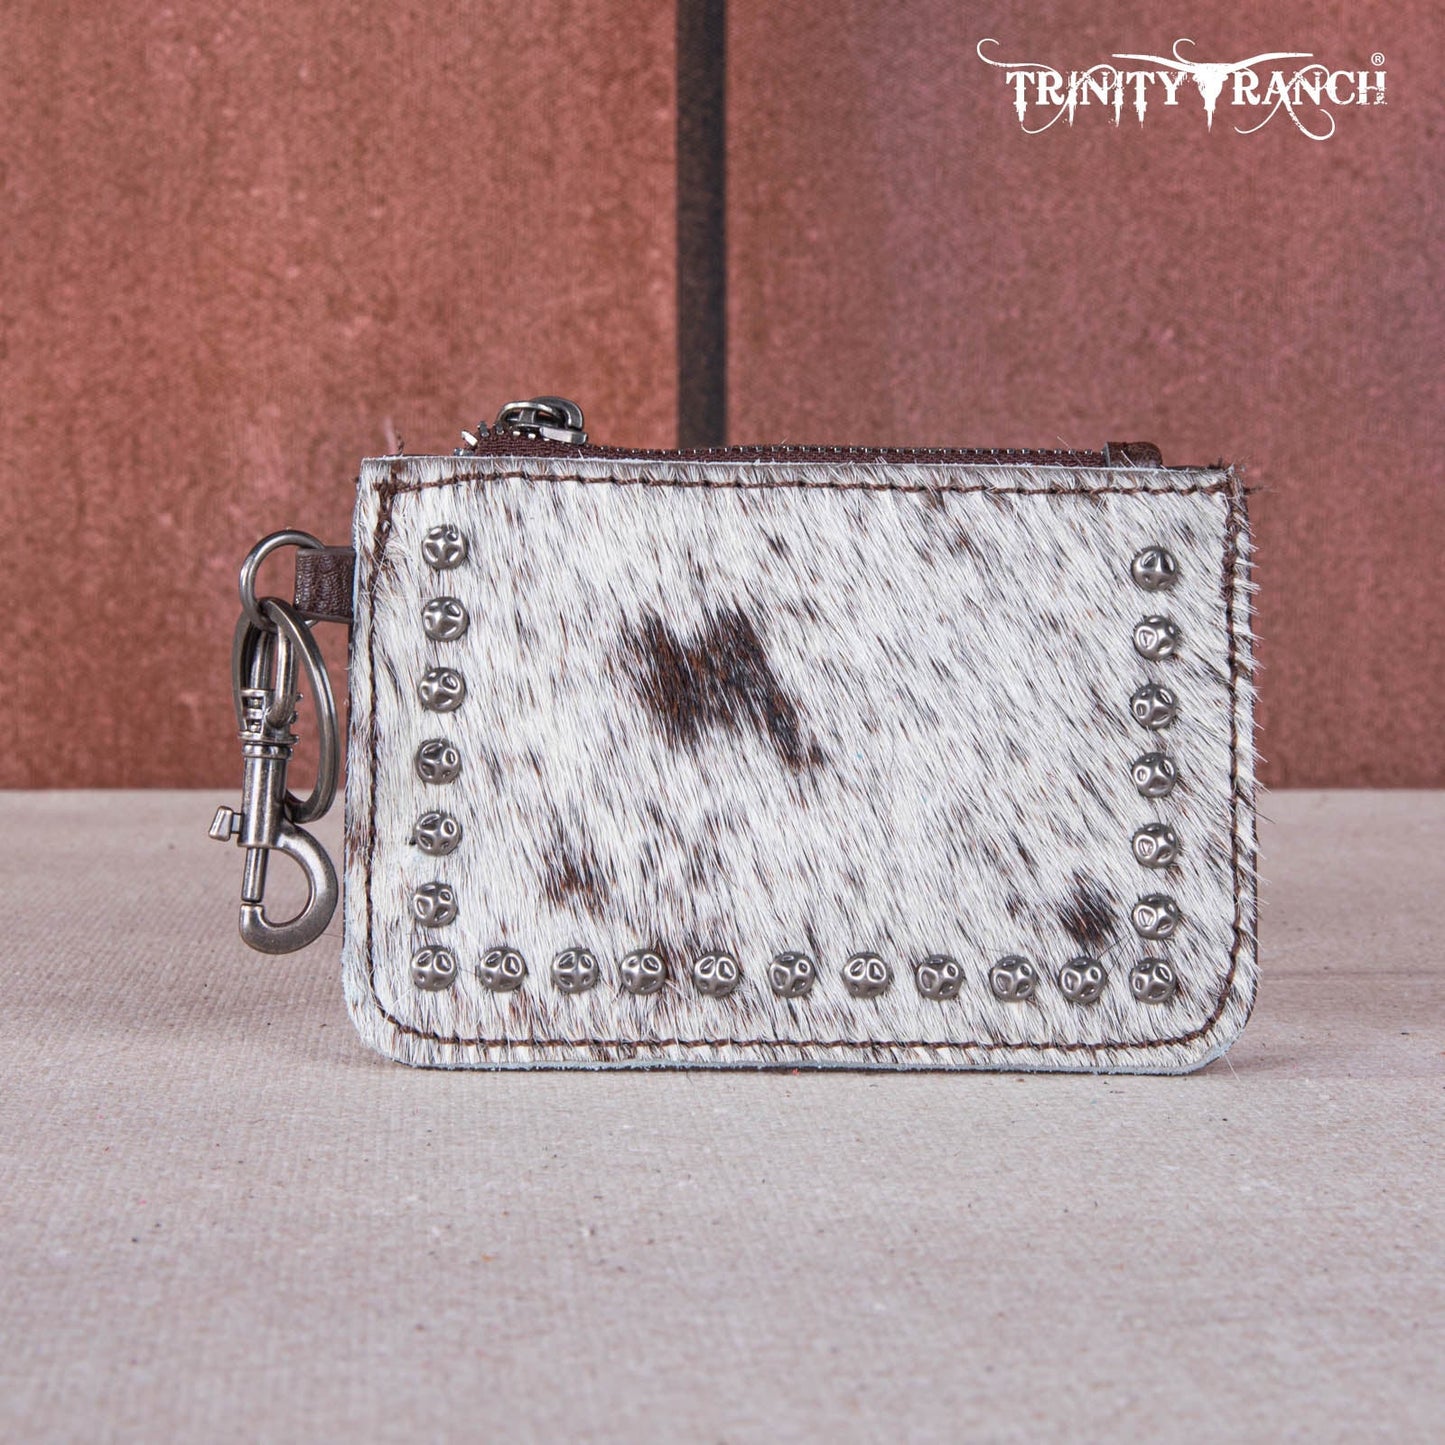 Trinity Ranch Genuine Hair-on Cowhide /tooled Collection Phone Purse With Coin Pouch Coffee